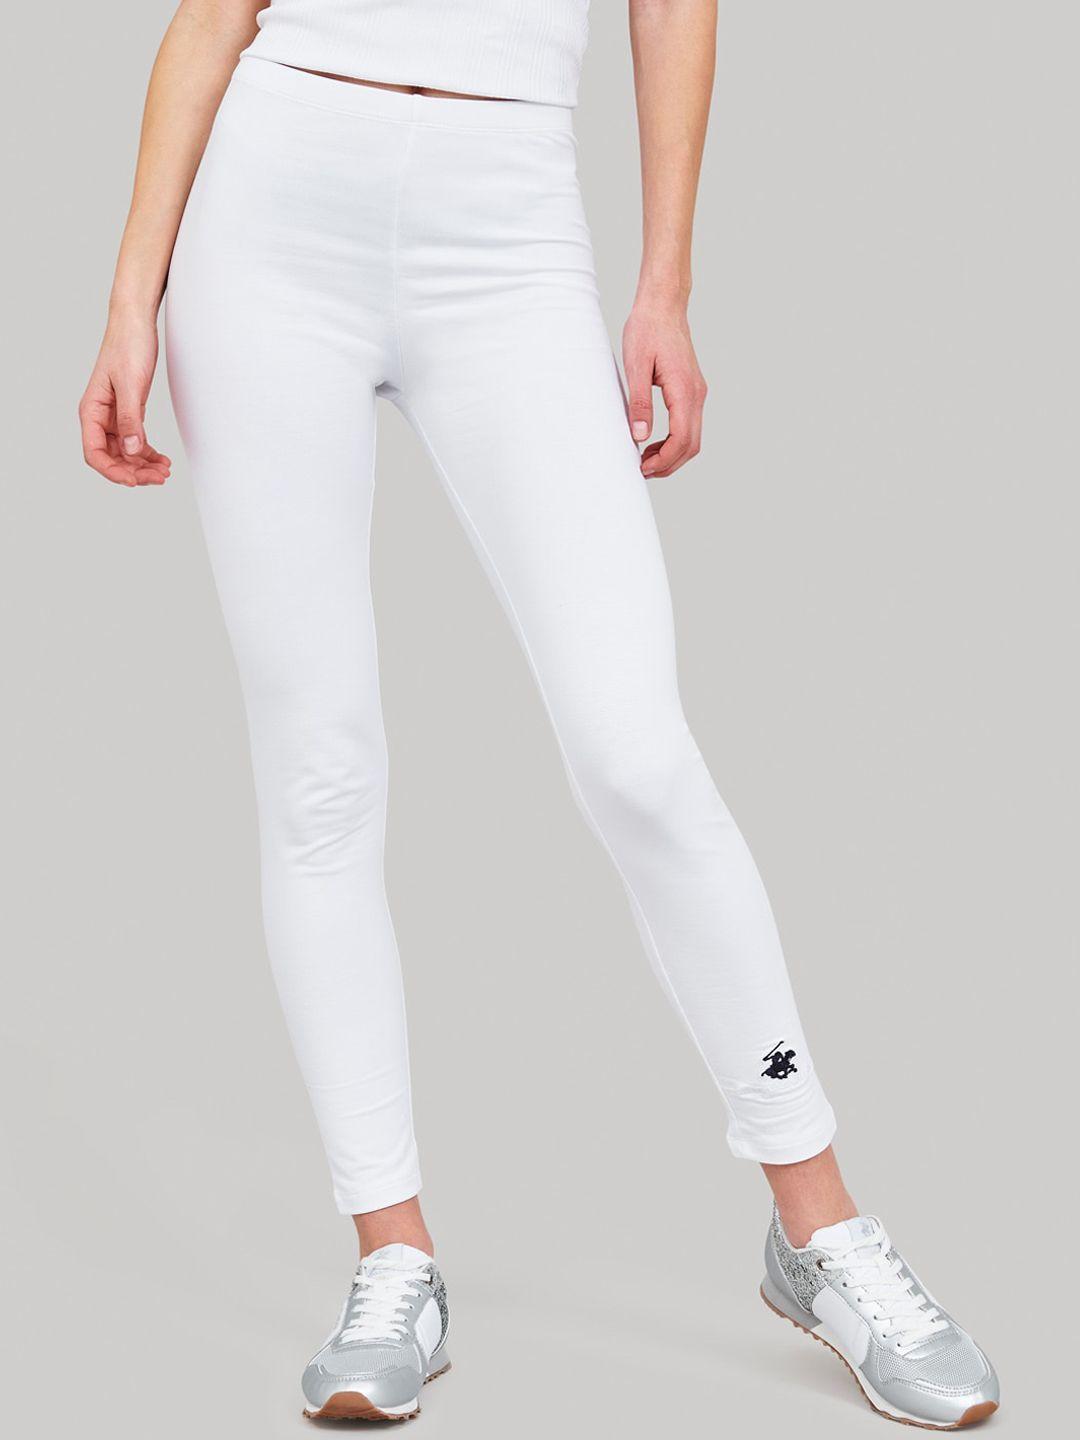 beverly-hills-polo-club-women-white-solid-track-pants